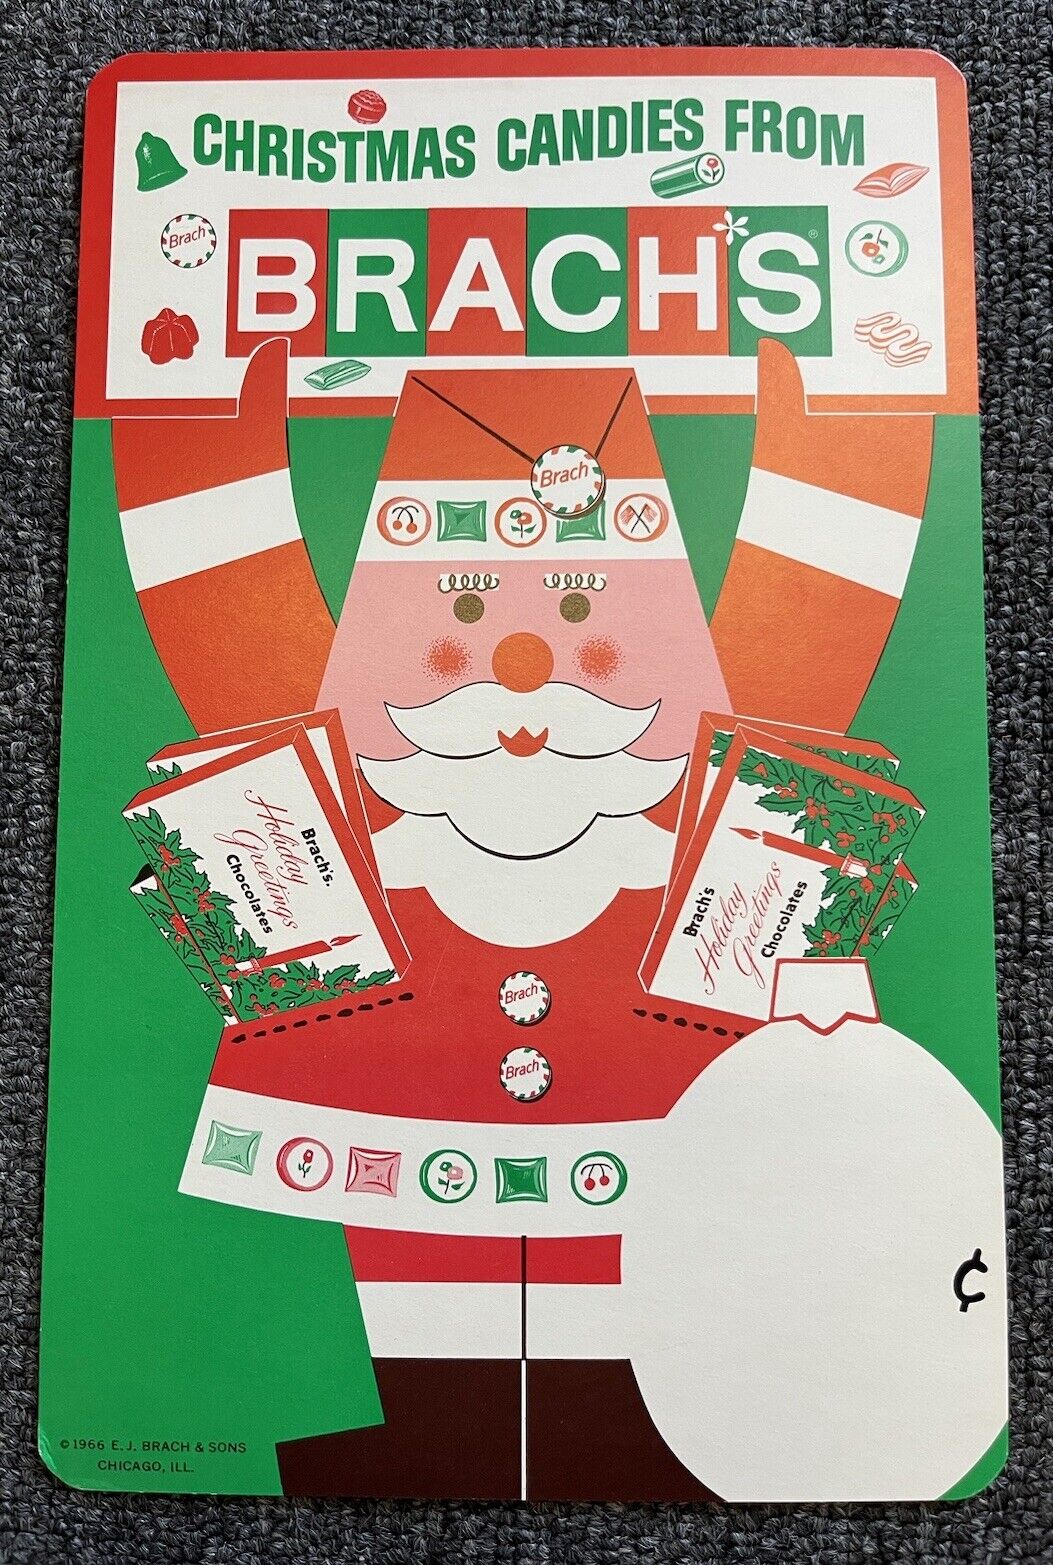 Vintage Brach’s Christmas Candy Advertisement Poster 1966